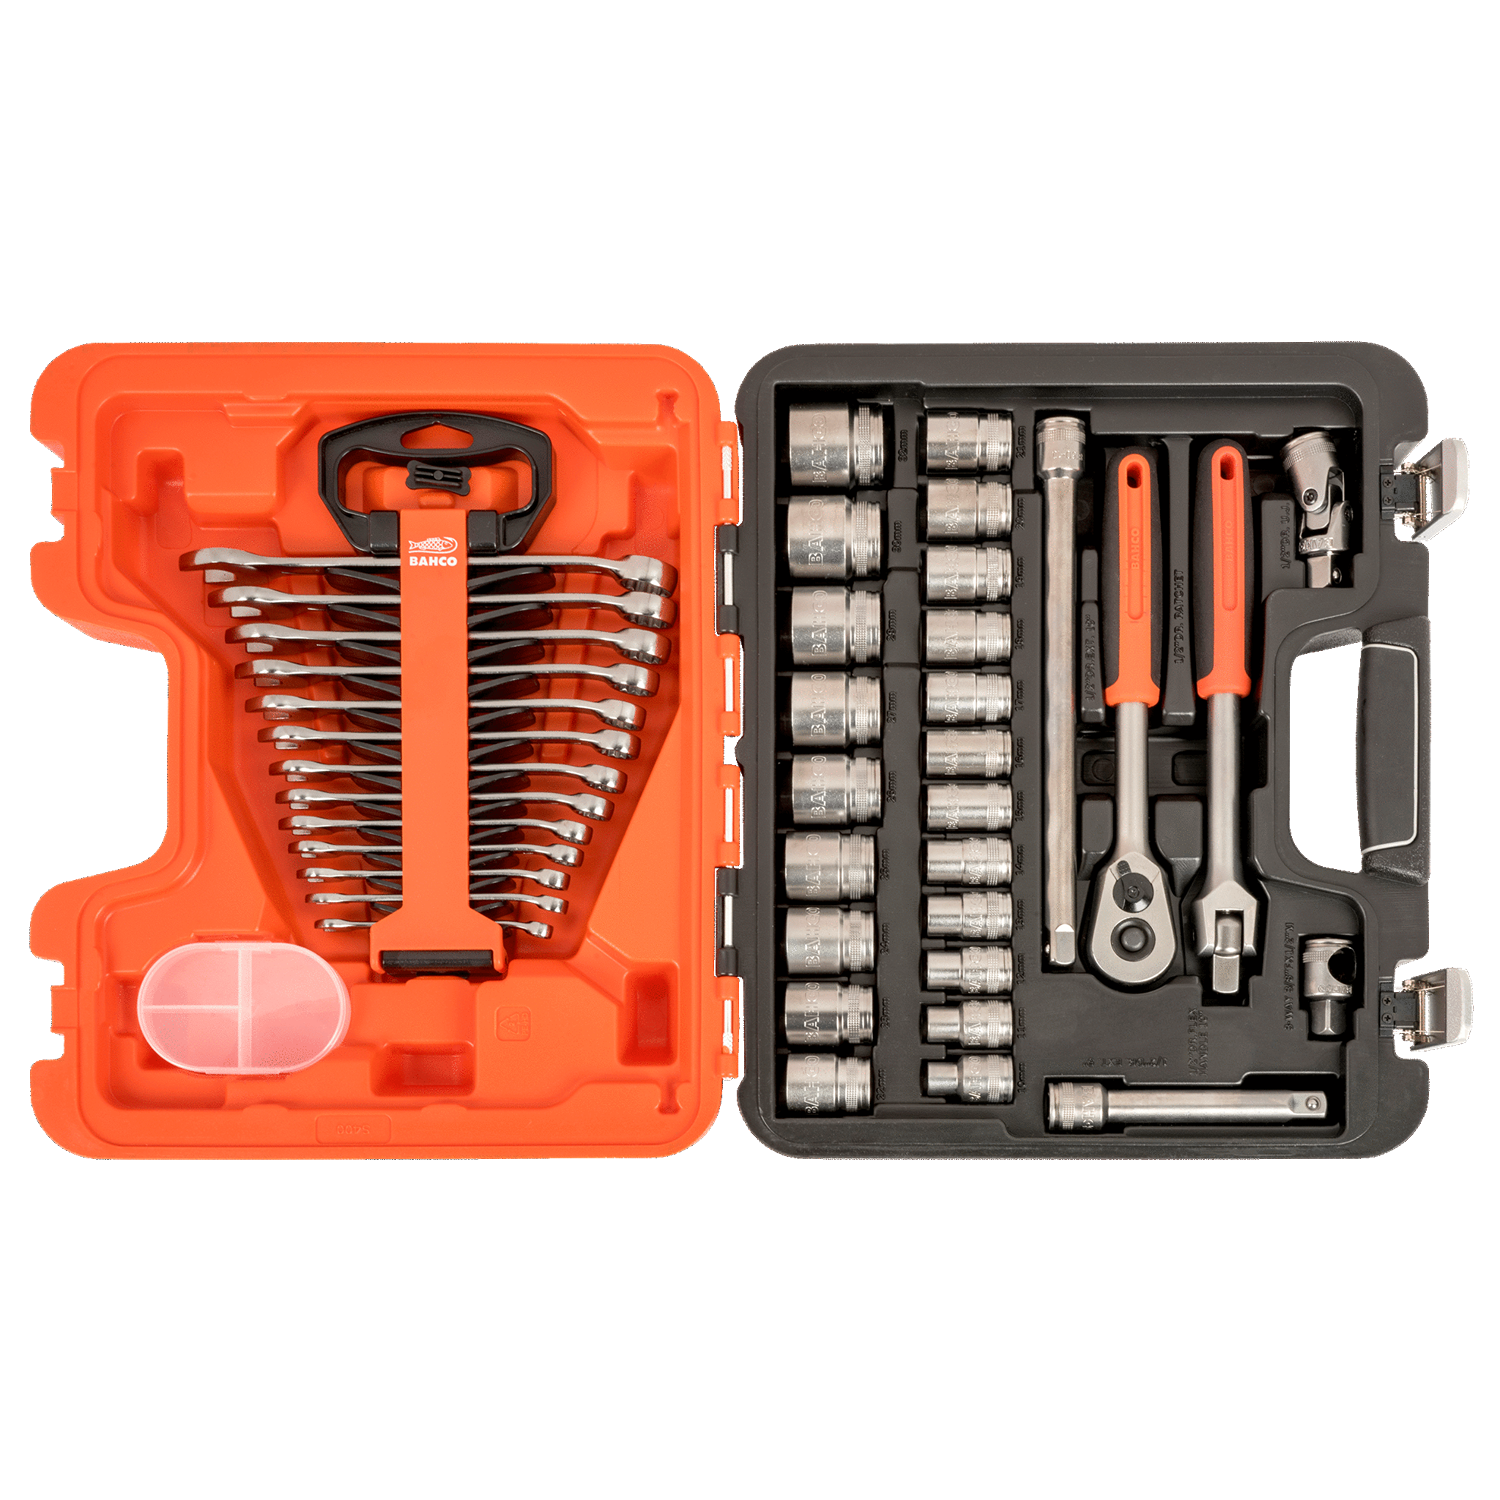 BAHCO S400 1/2” Square Drive Socket Set Metric Spanner Set - Premium Socket Set from BAHCO - Shop now at Yew Aik.